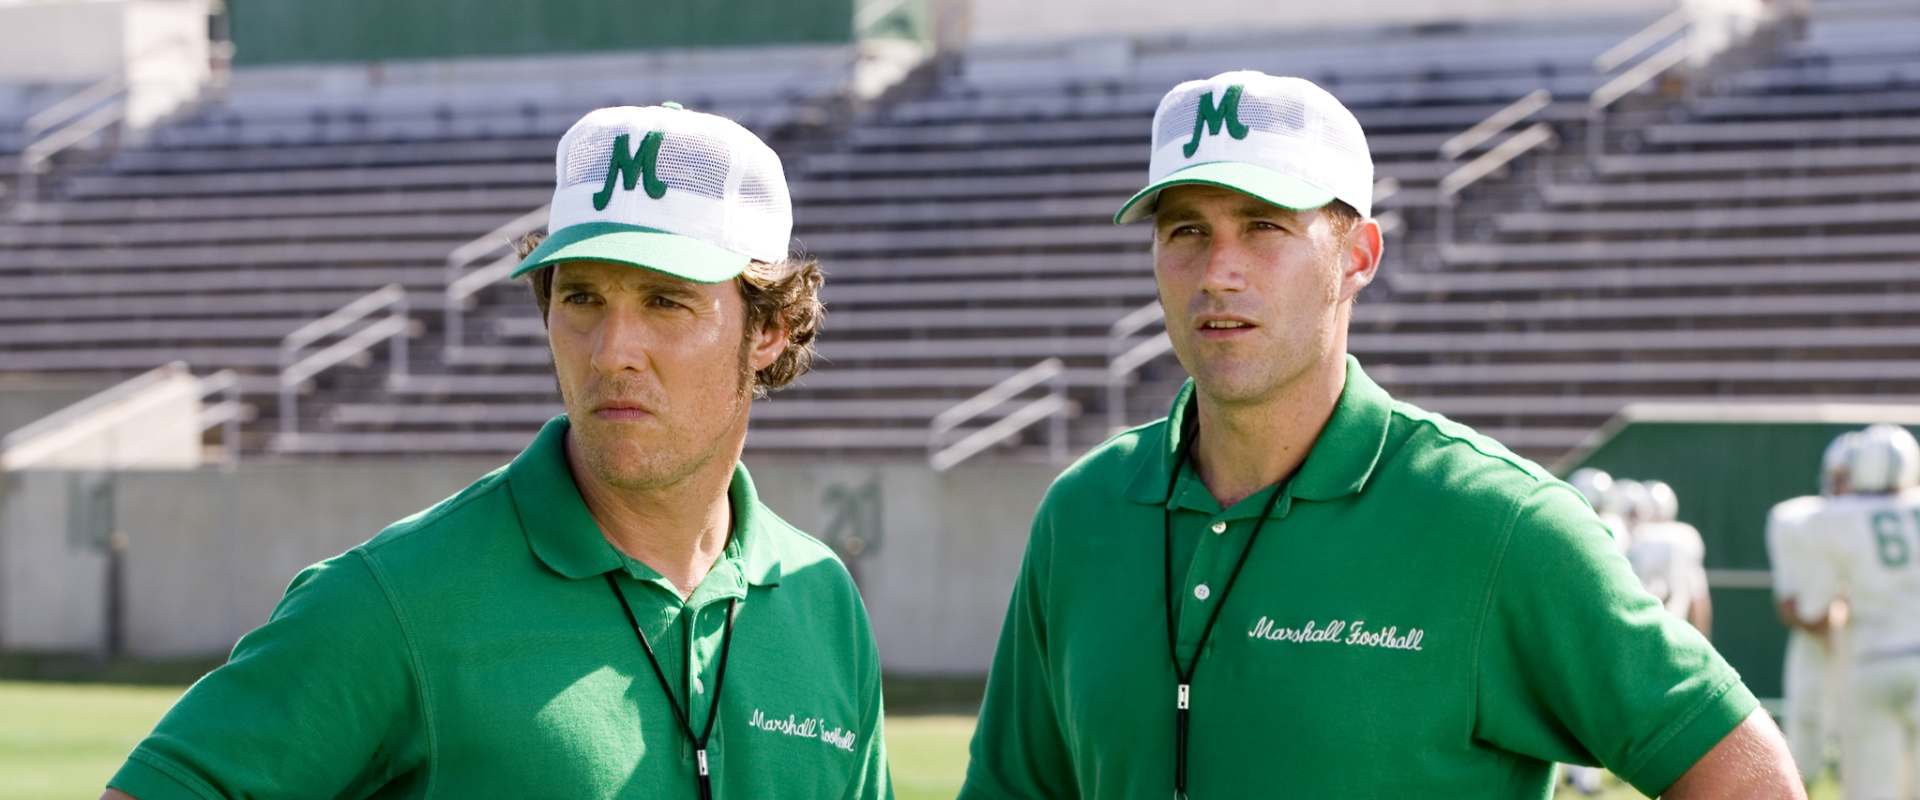 We Are Marshall background 2